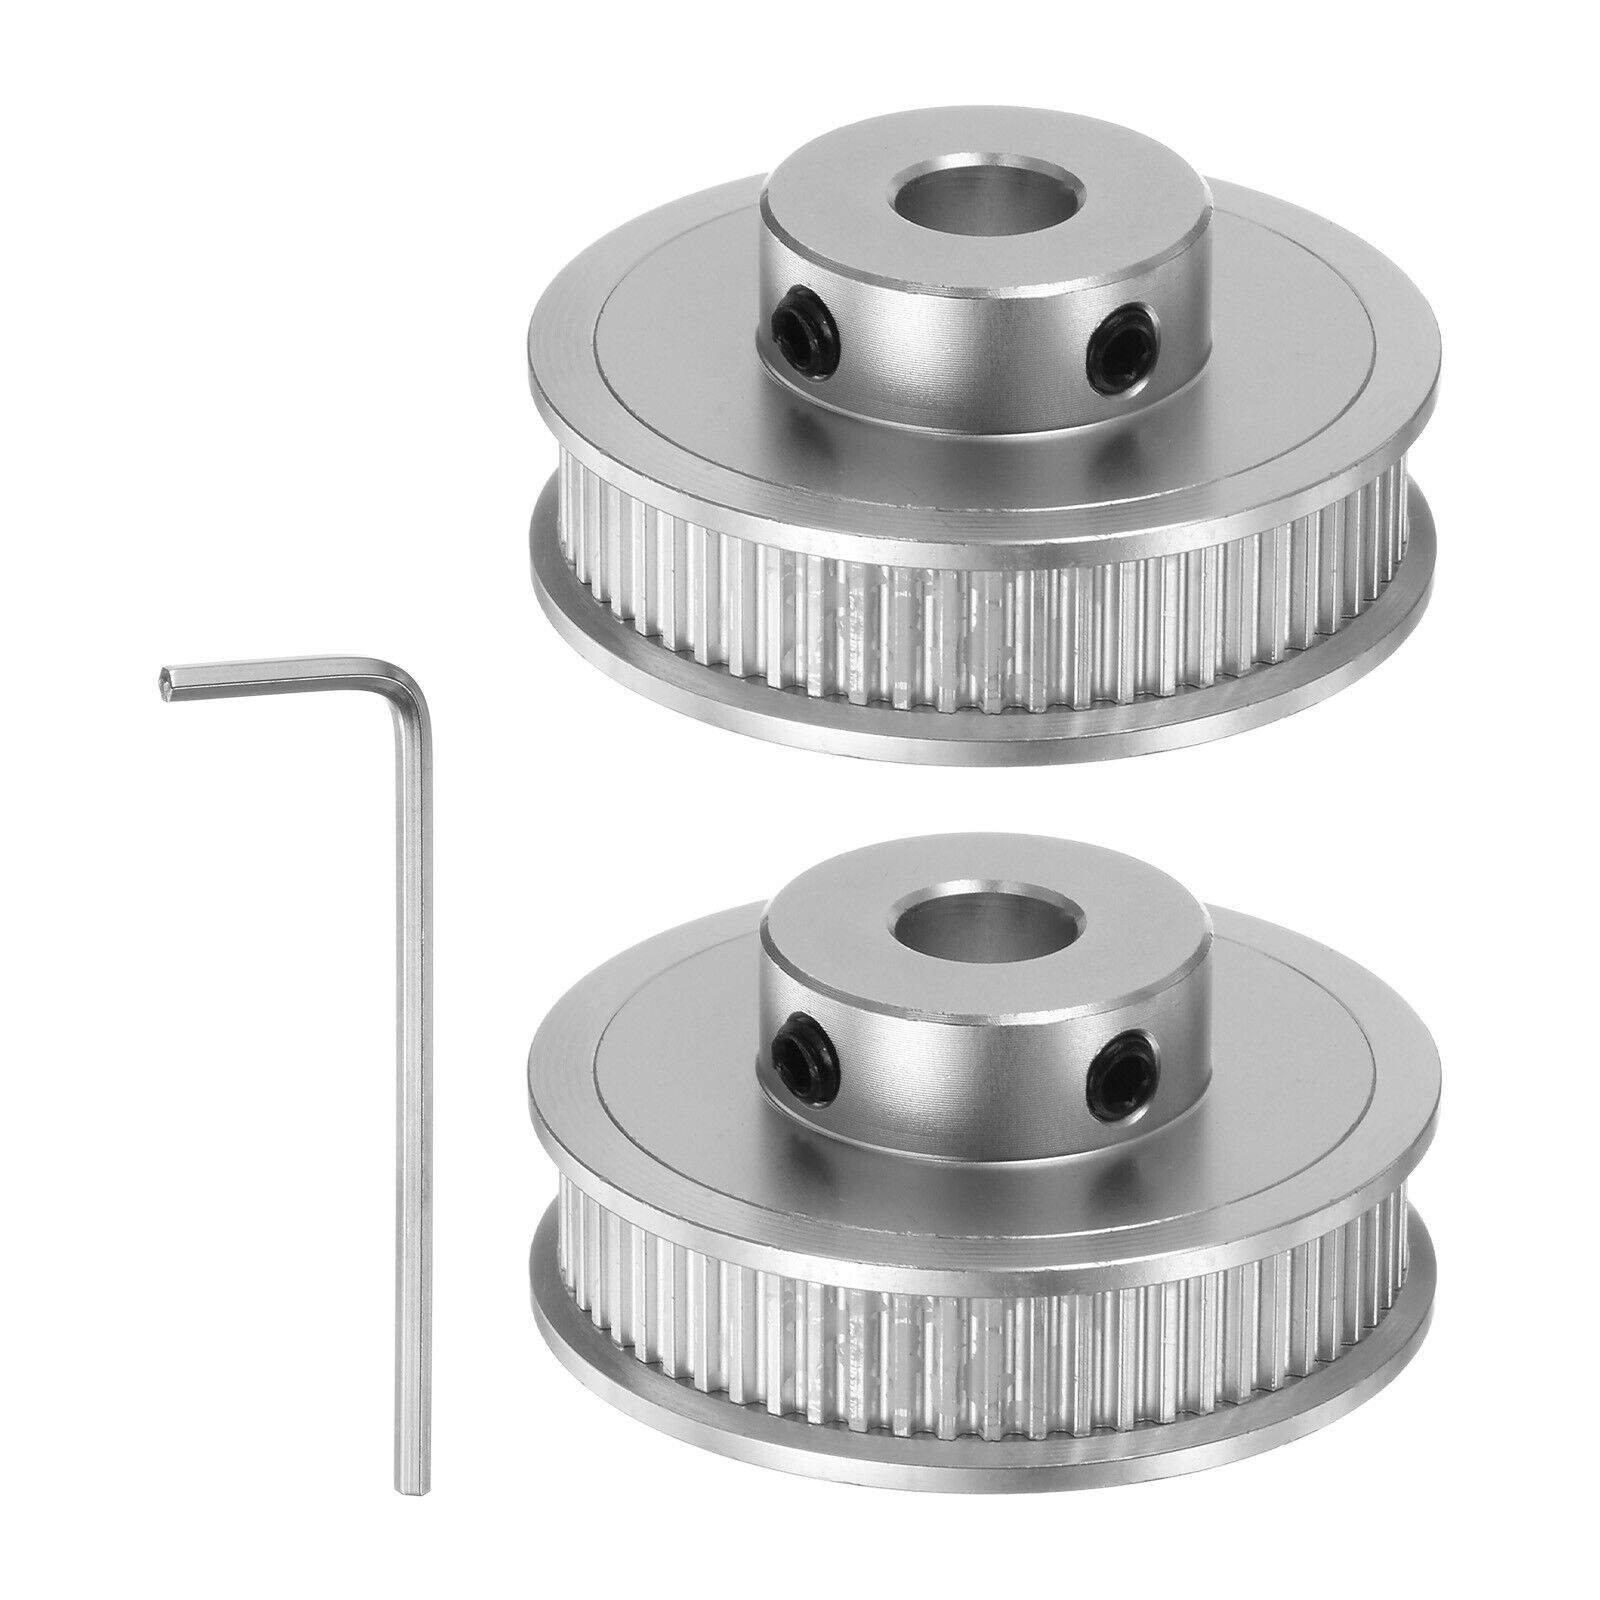 2pcs 2GT Timing Pulley 60T 8mm Bore 40mm Dia Aluminum Pulley for 6mm Width Belt